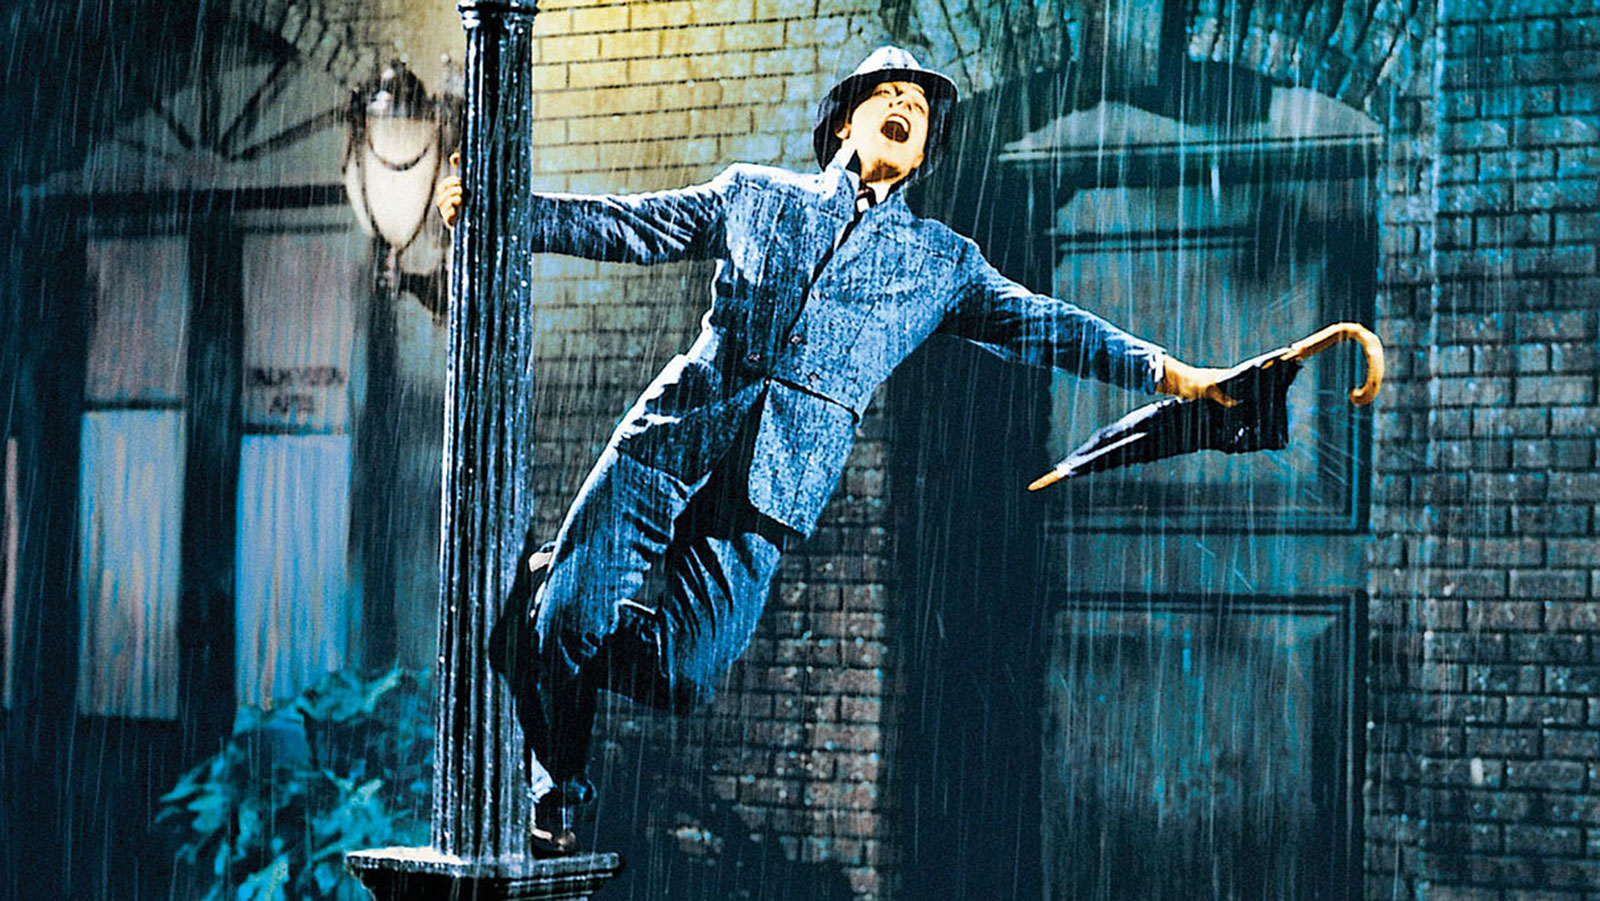 You got 12 out of 16! Can You Name These Popular Movie Musicals?